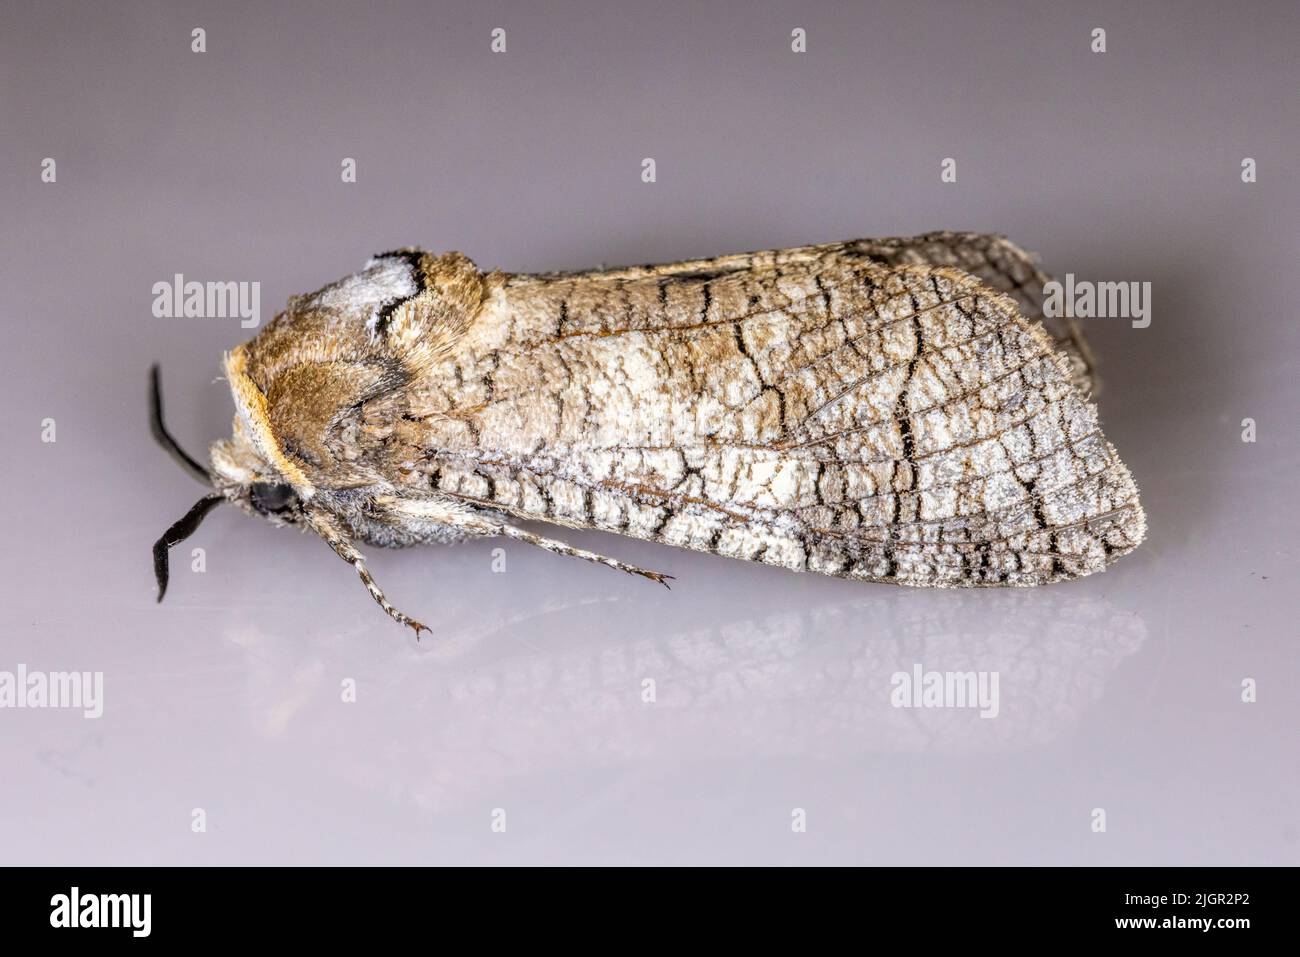 Goat Moth - Cossus cossus - Cossidae - adult moth on a neutral background Stock Photo